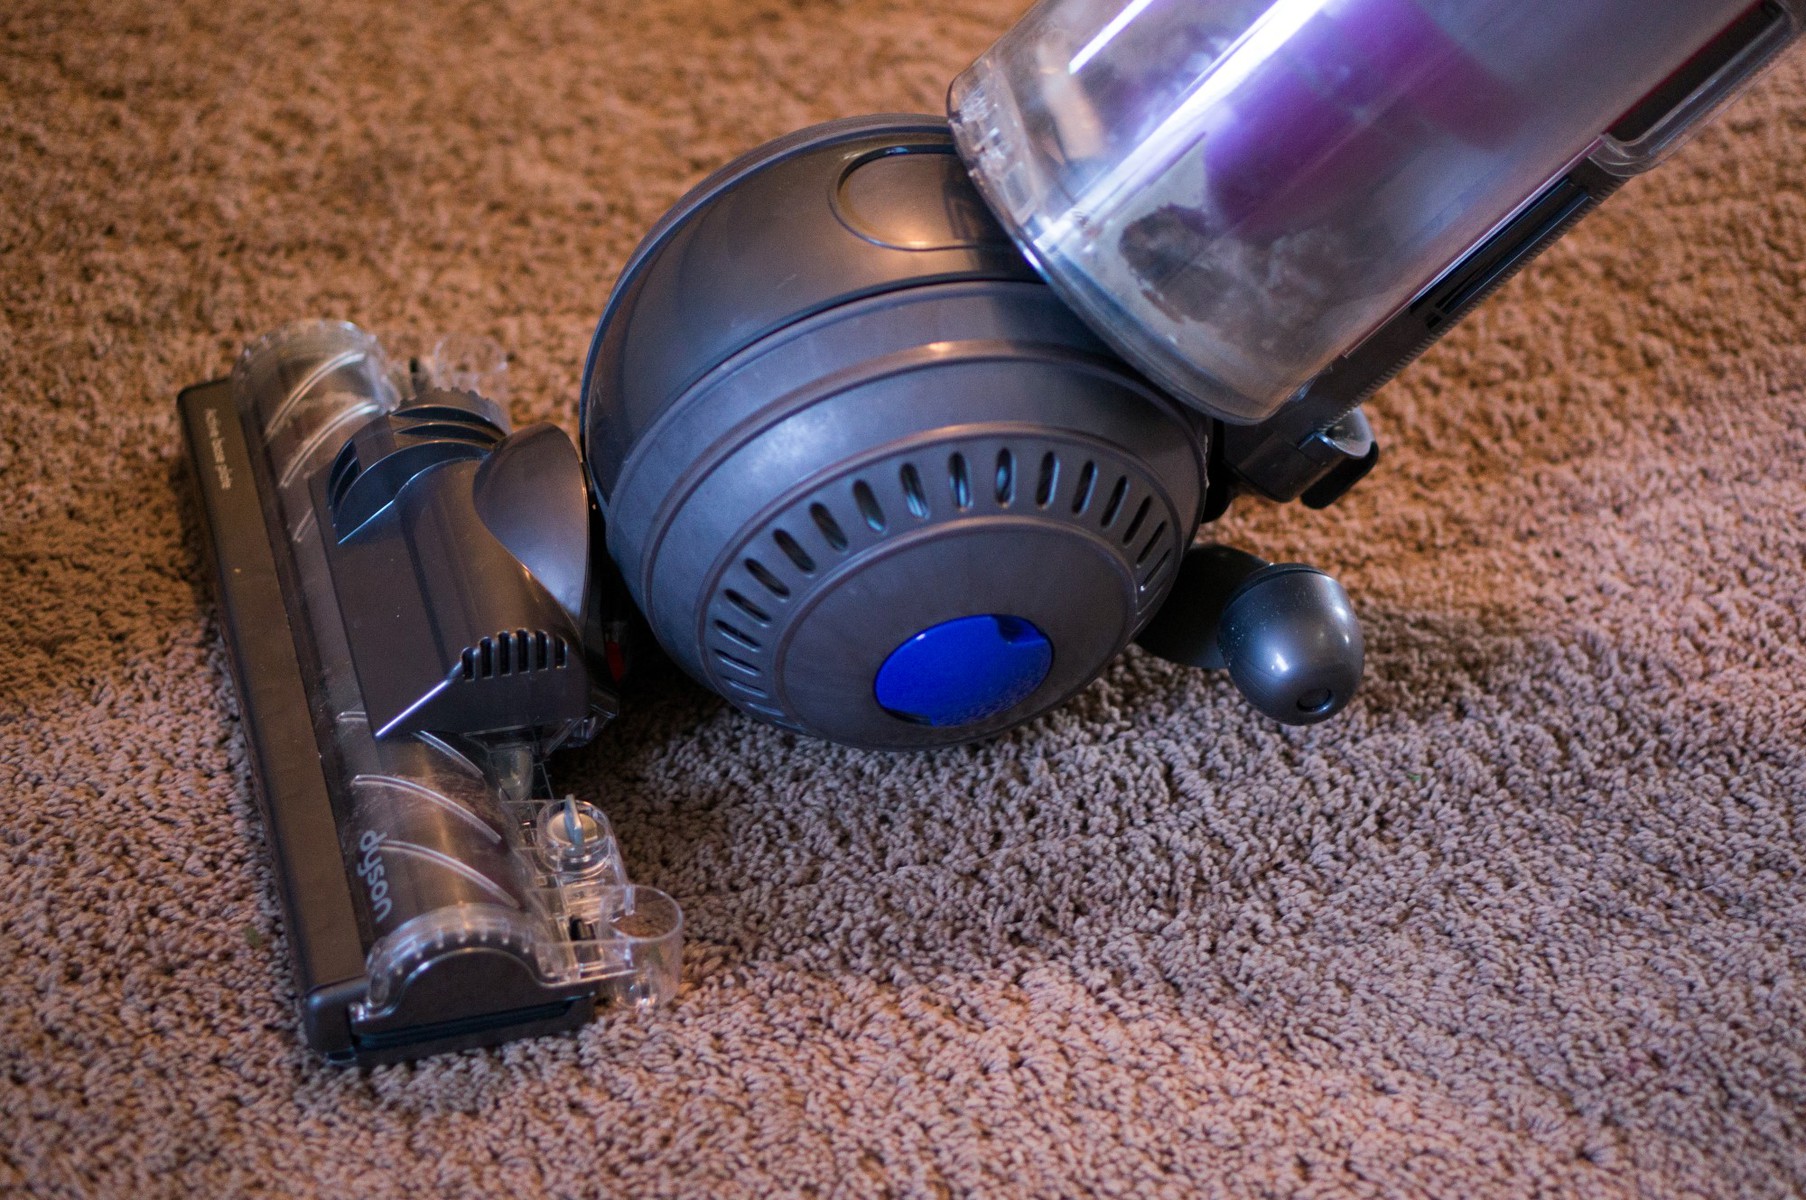 Dyson DC41 Animal Complete Review